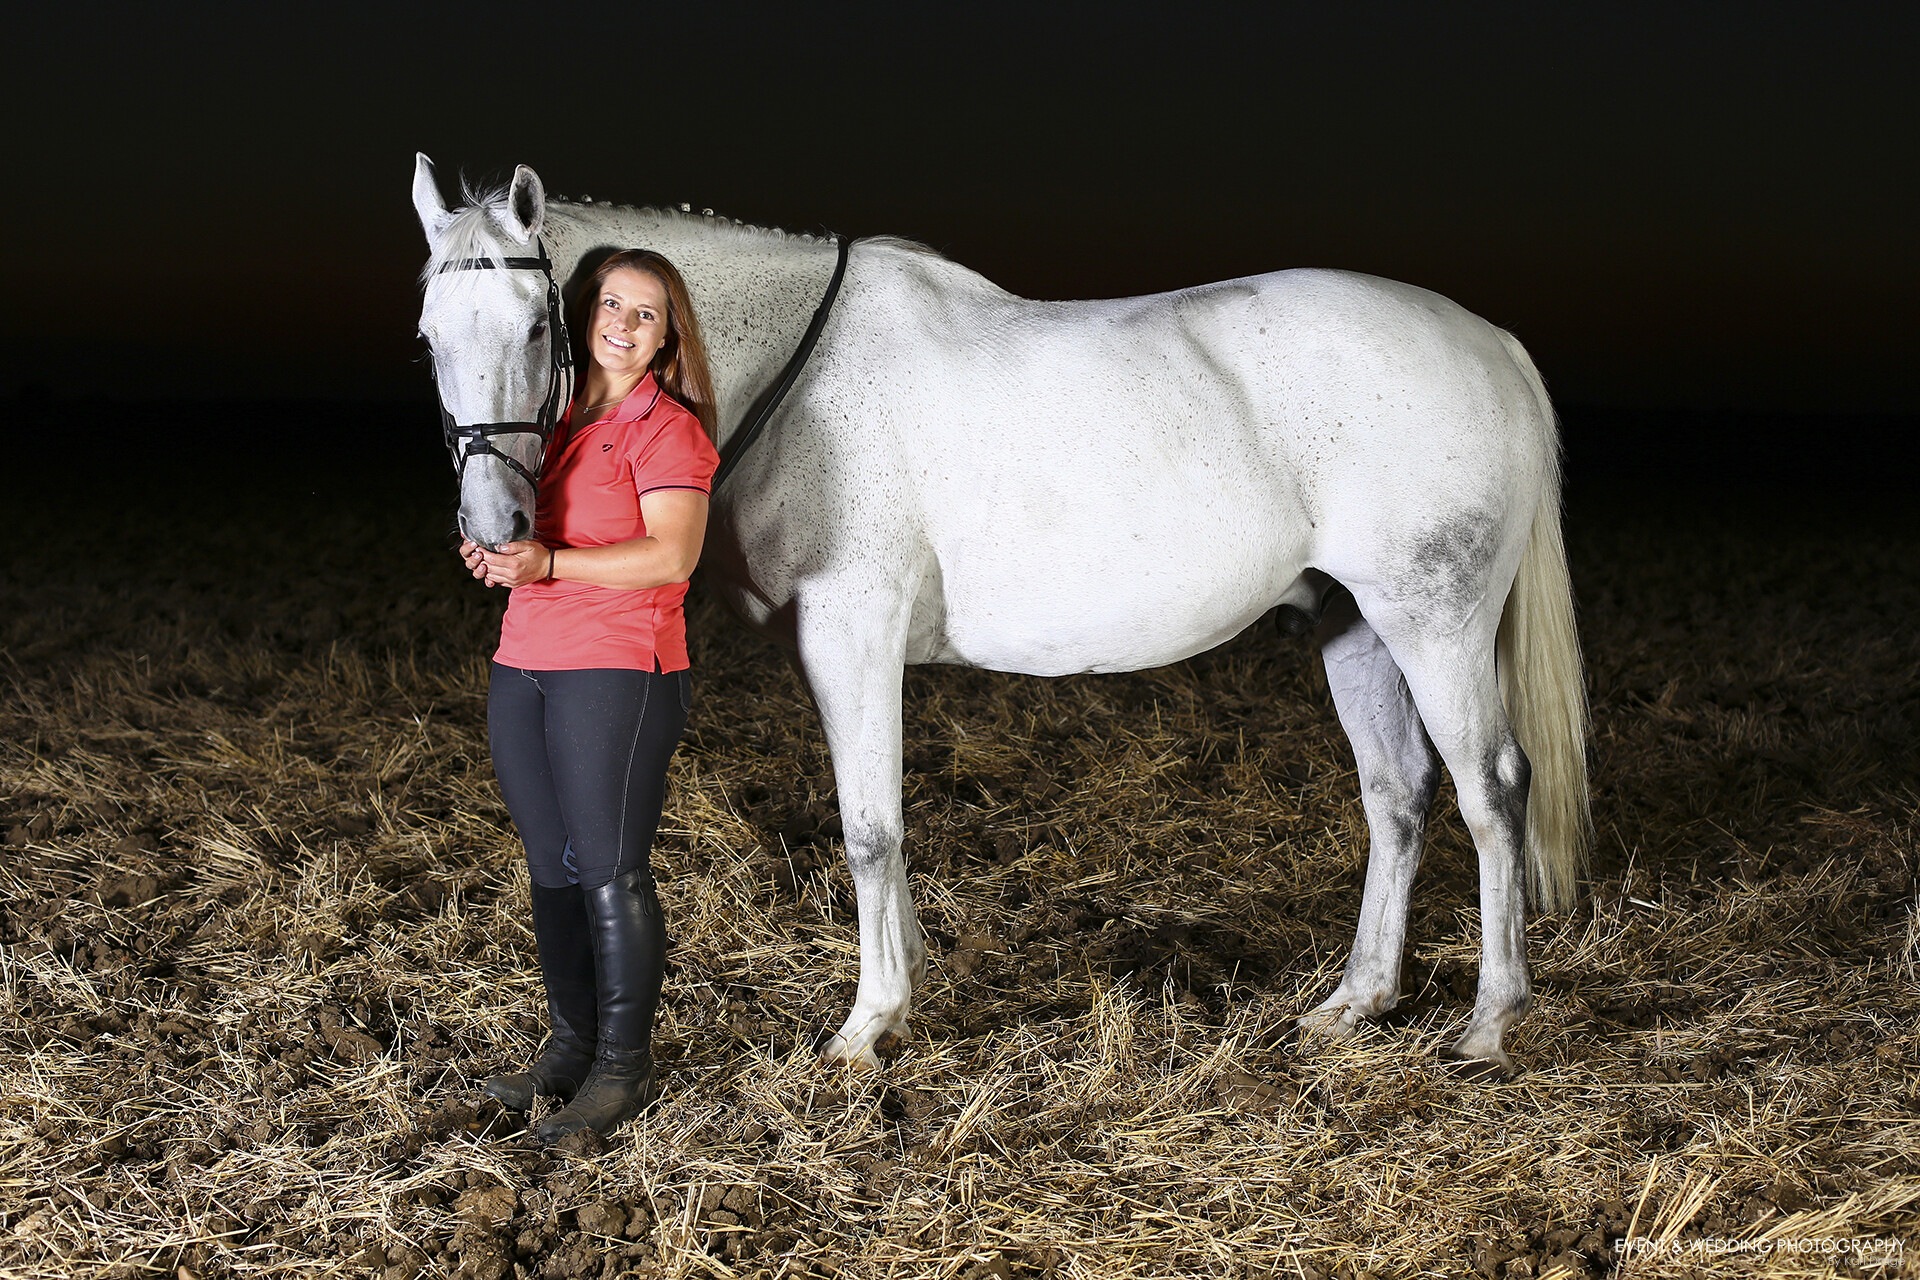 Horse and female rider stood in a ploughed field after dark, illuminated by studio lights